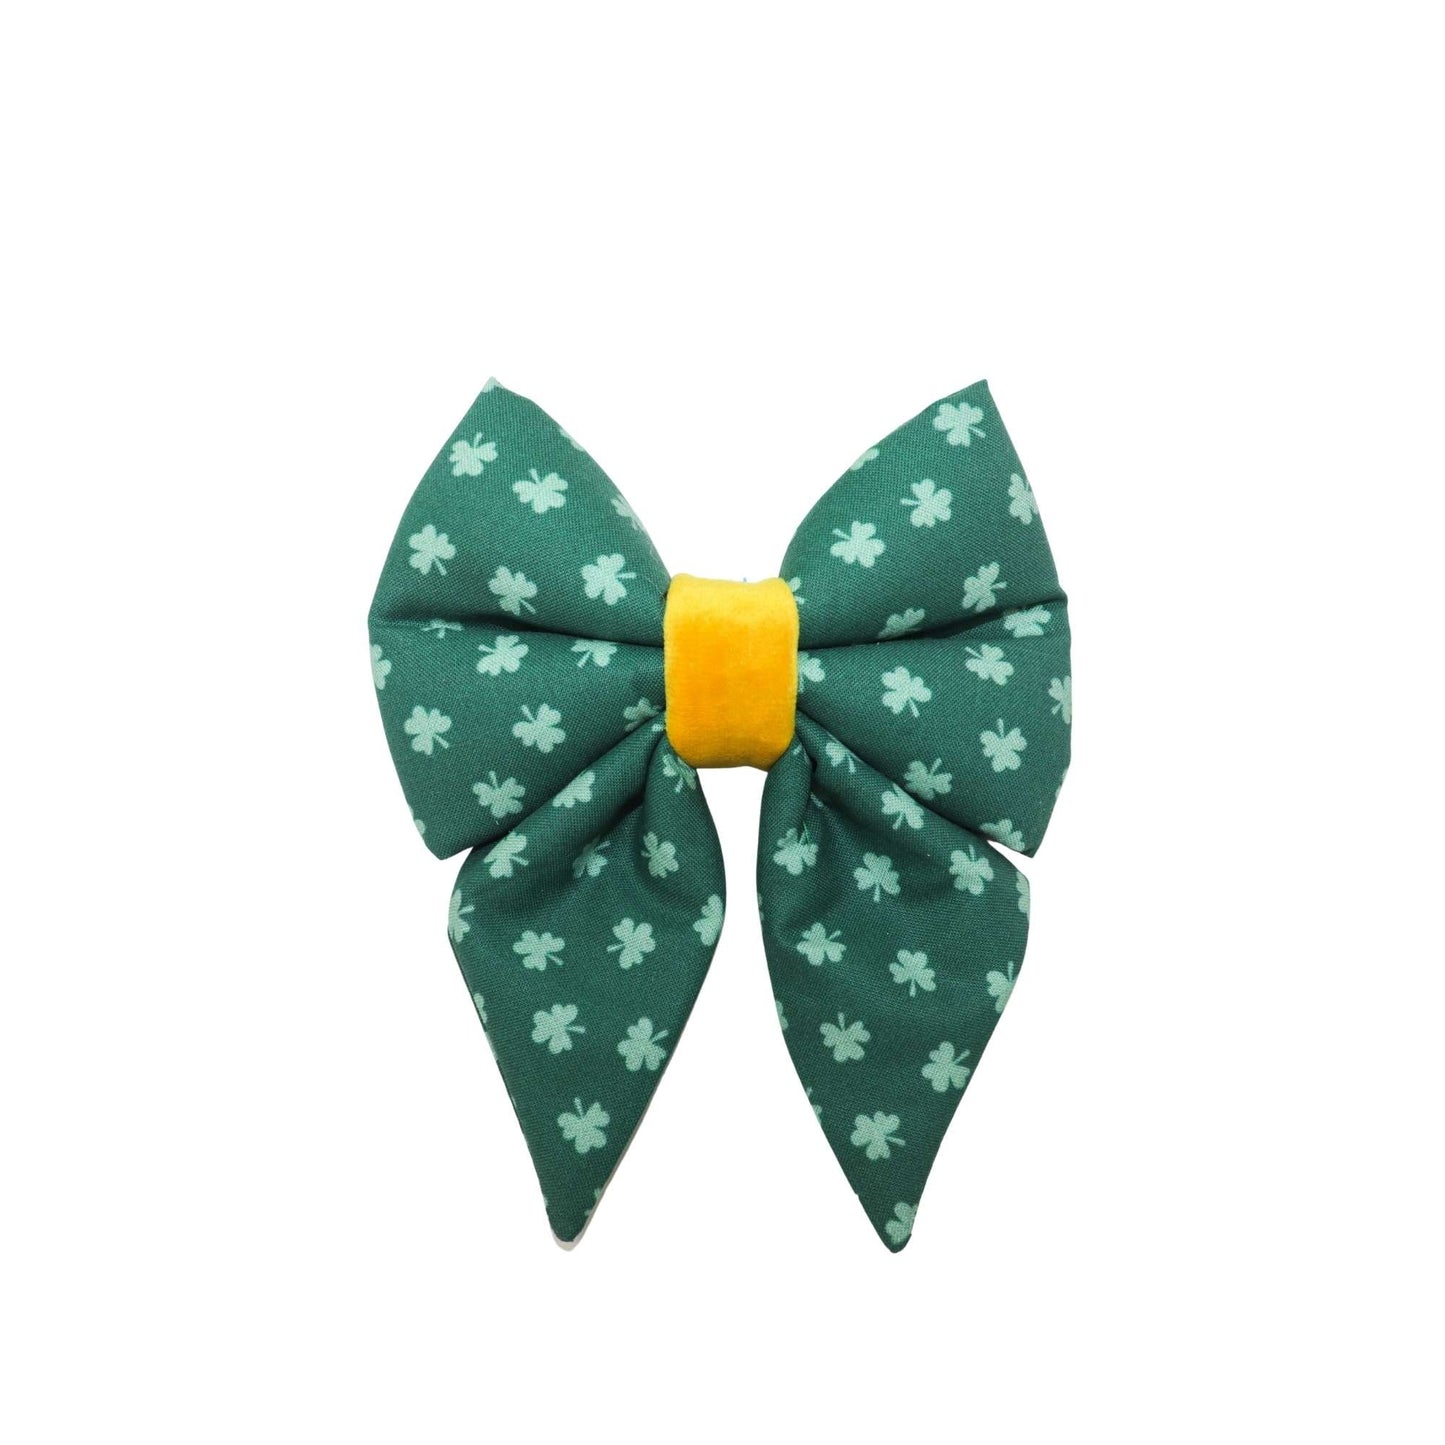 "Pinch Proof" Sailor Bow